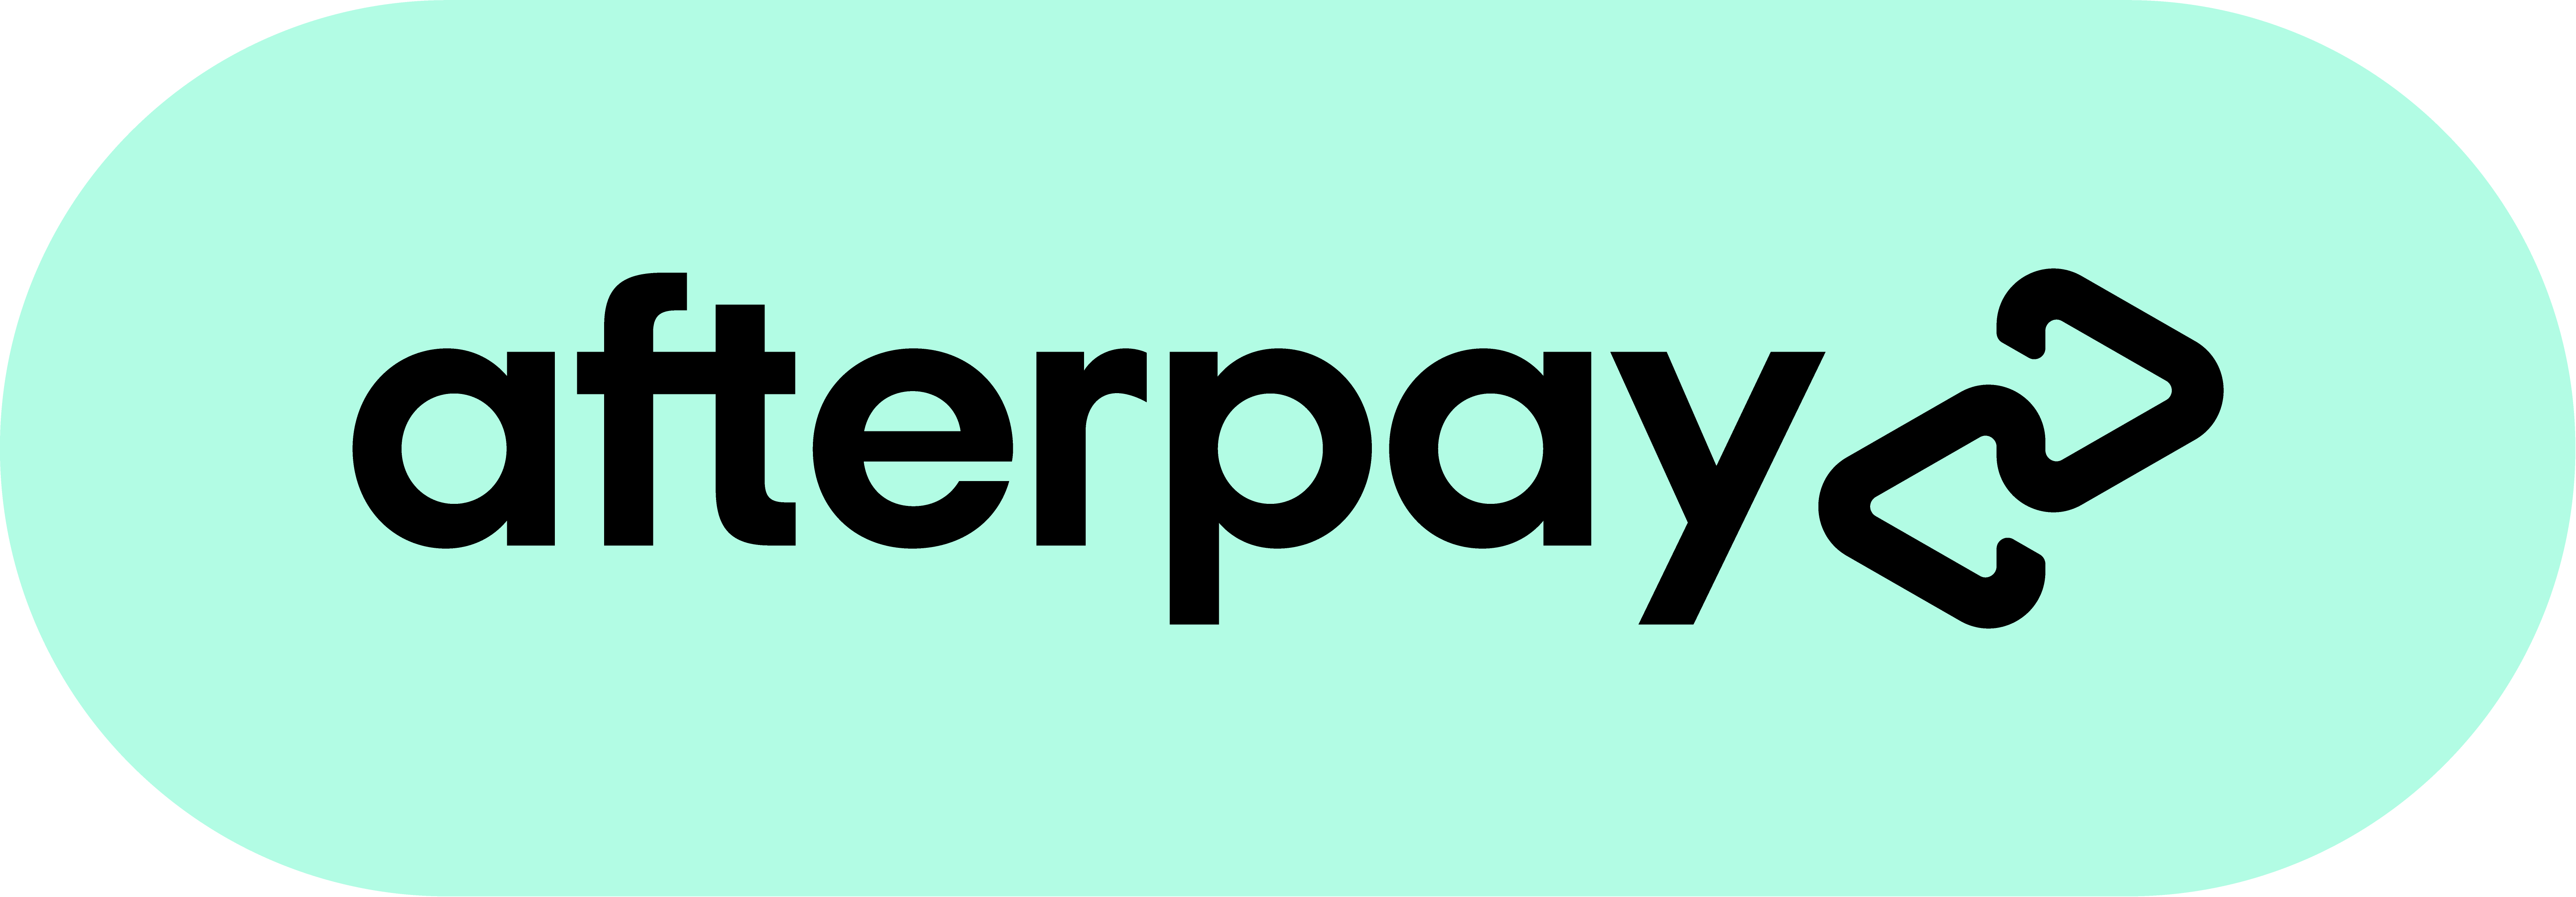 “afterpay